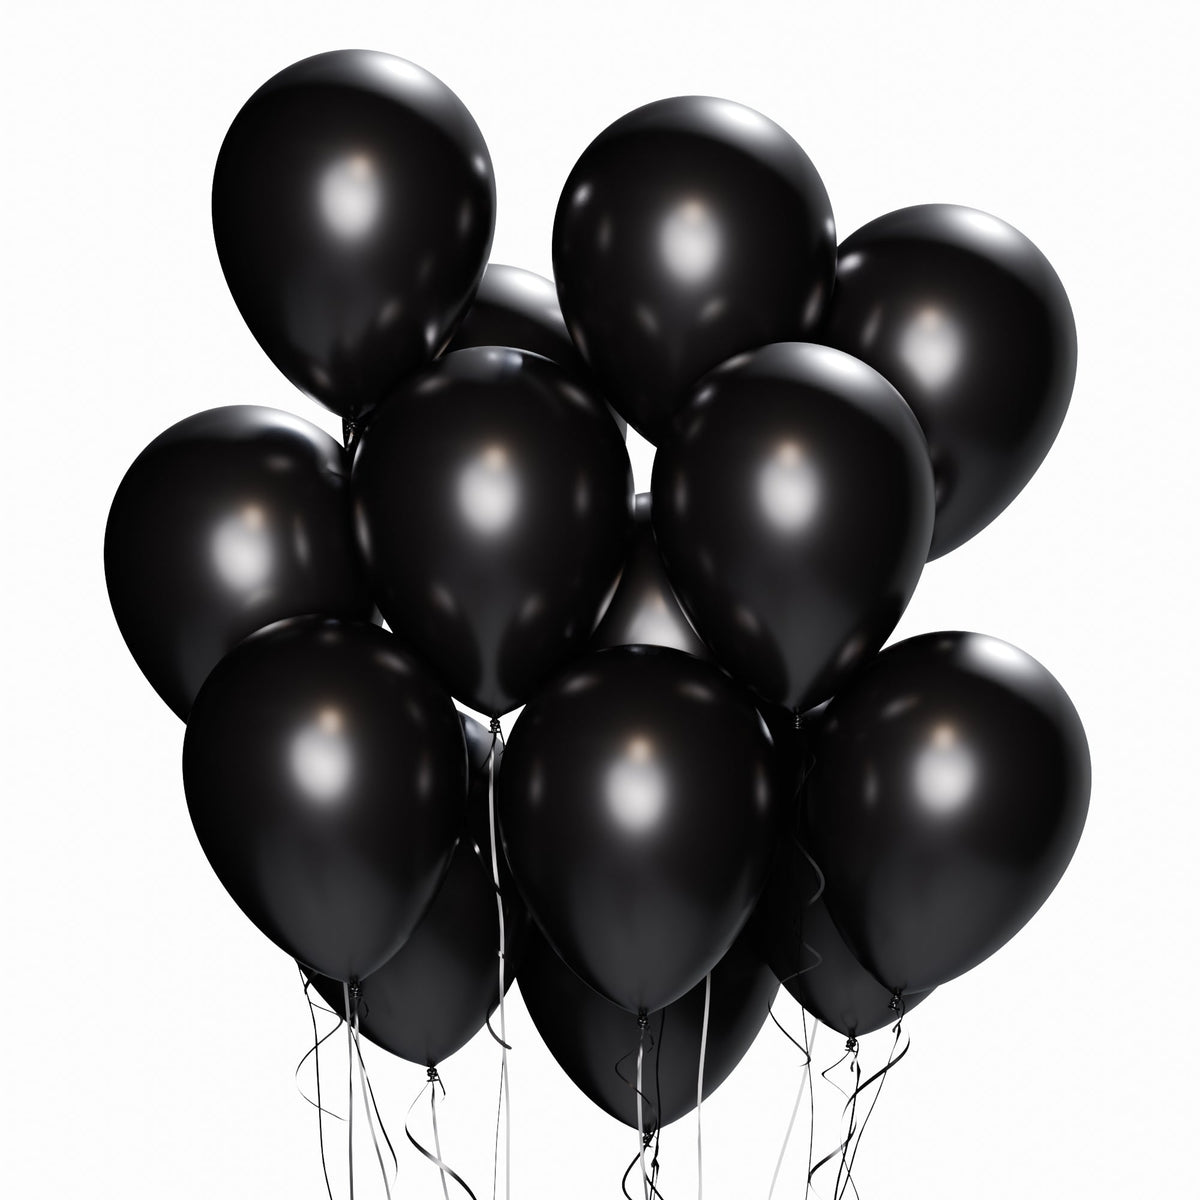 WIDE OCEAN INTERNATIONAL TRADE BEIJING CO., LTD Balloons Black Latex Balloon 12 Inches, Pearl Collection, 15 Count 810064198021